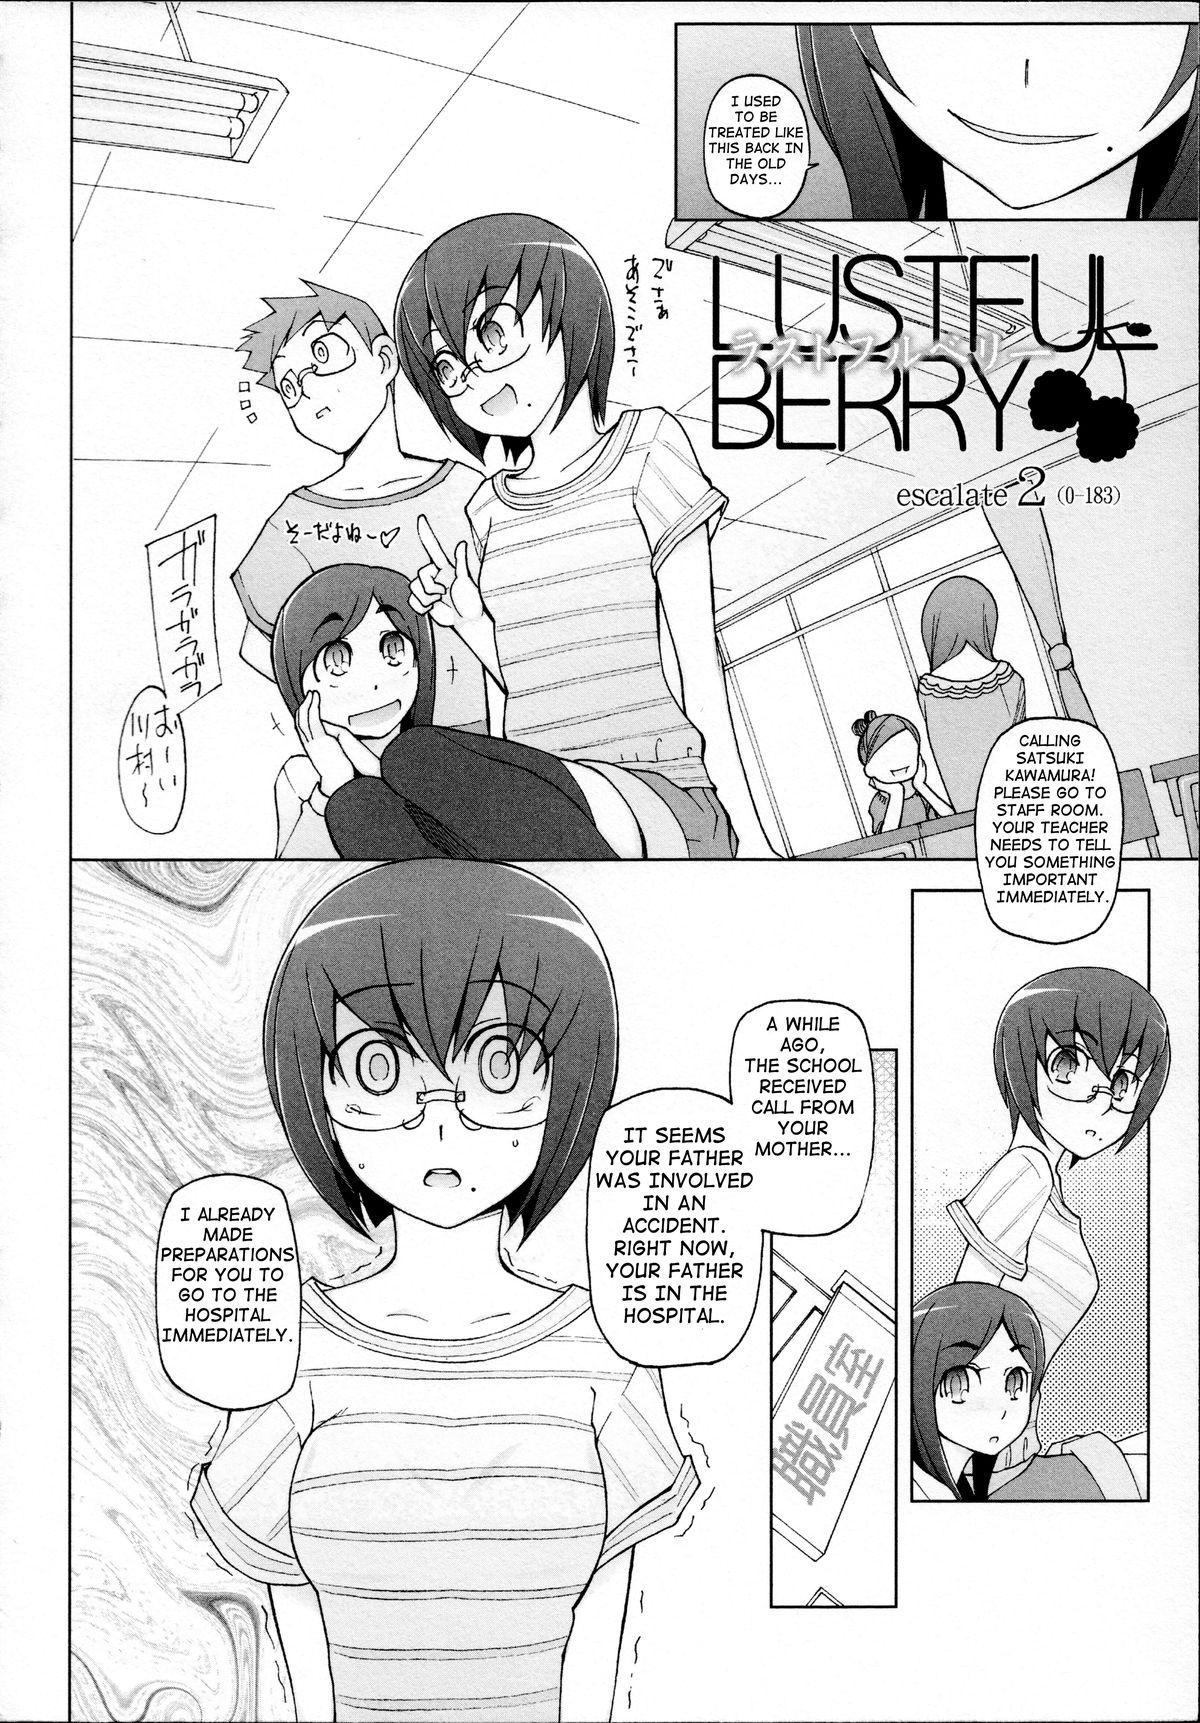 LUSTFUL BERRY Chapter 1-5 39